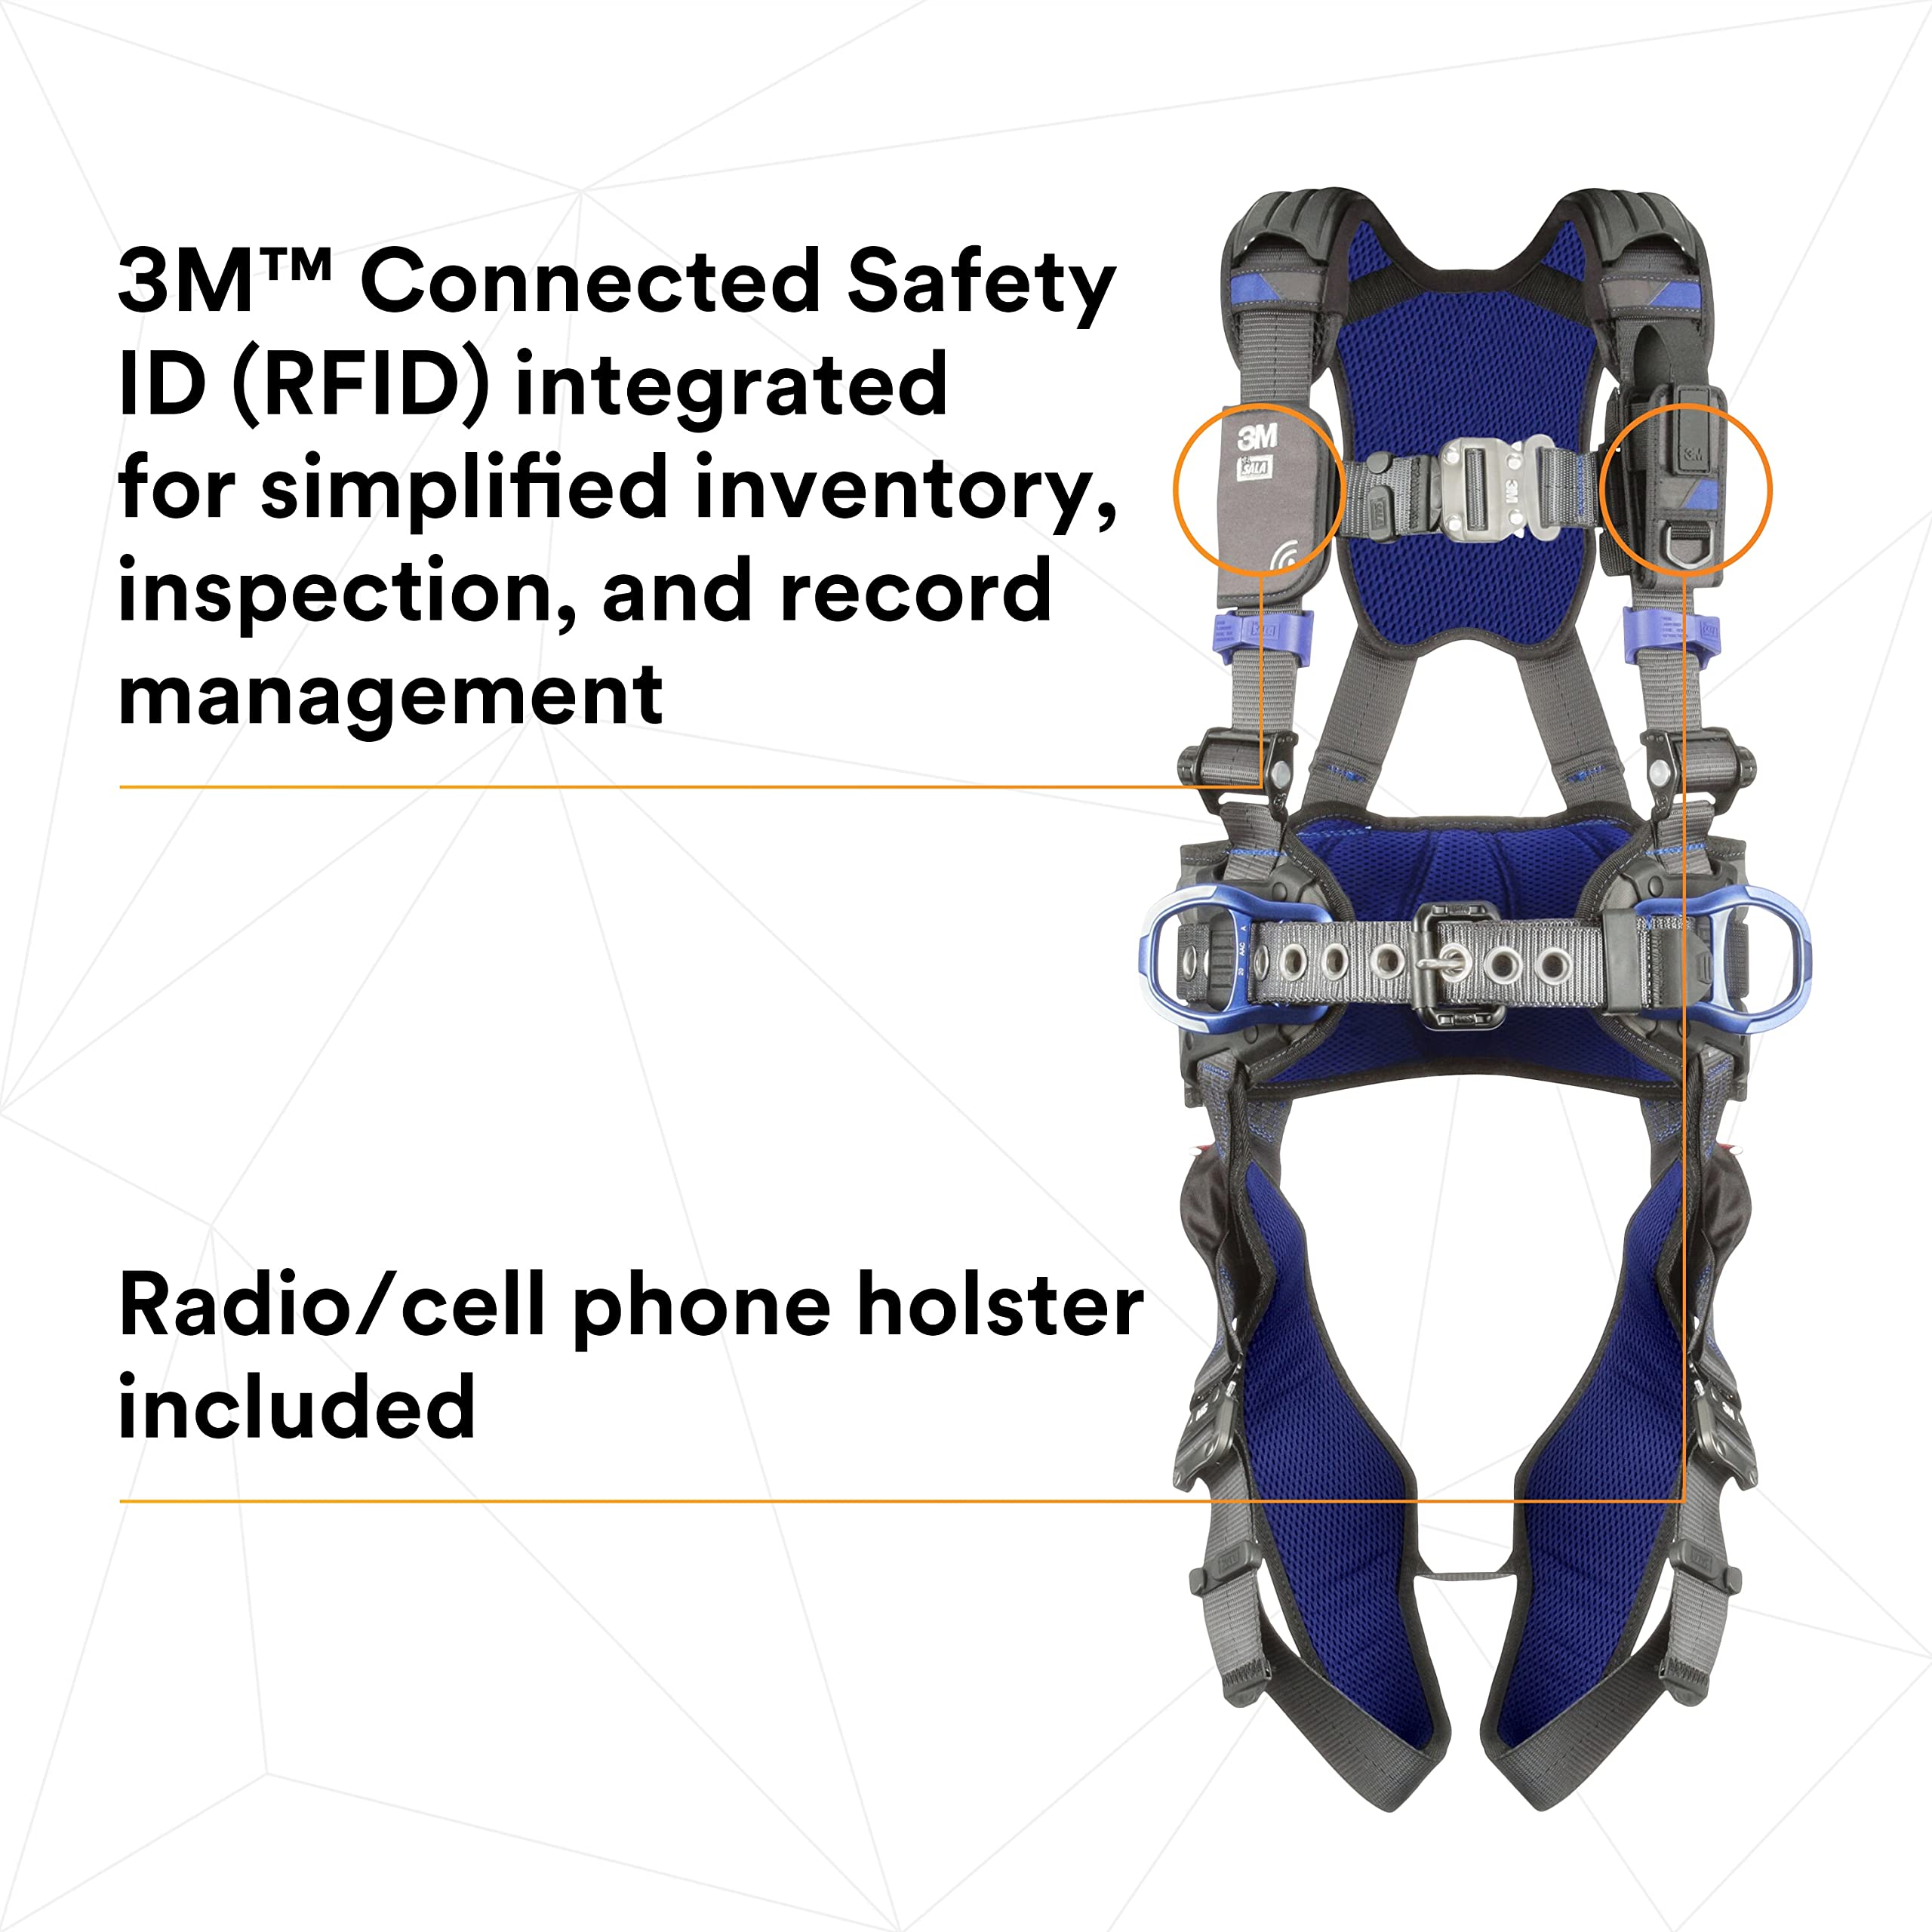 3M 1113124 DBI-SALA ExoFit X300 Comfort Construction Positioning Safety Harness, Construction Fall Protection, Aluminum Back and Hip D-Rings, Auto-Locking Quick Connect Leg and Chest Buckles, Medium